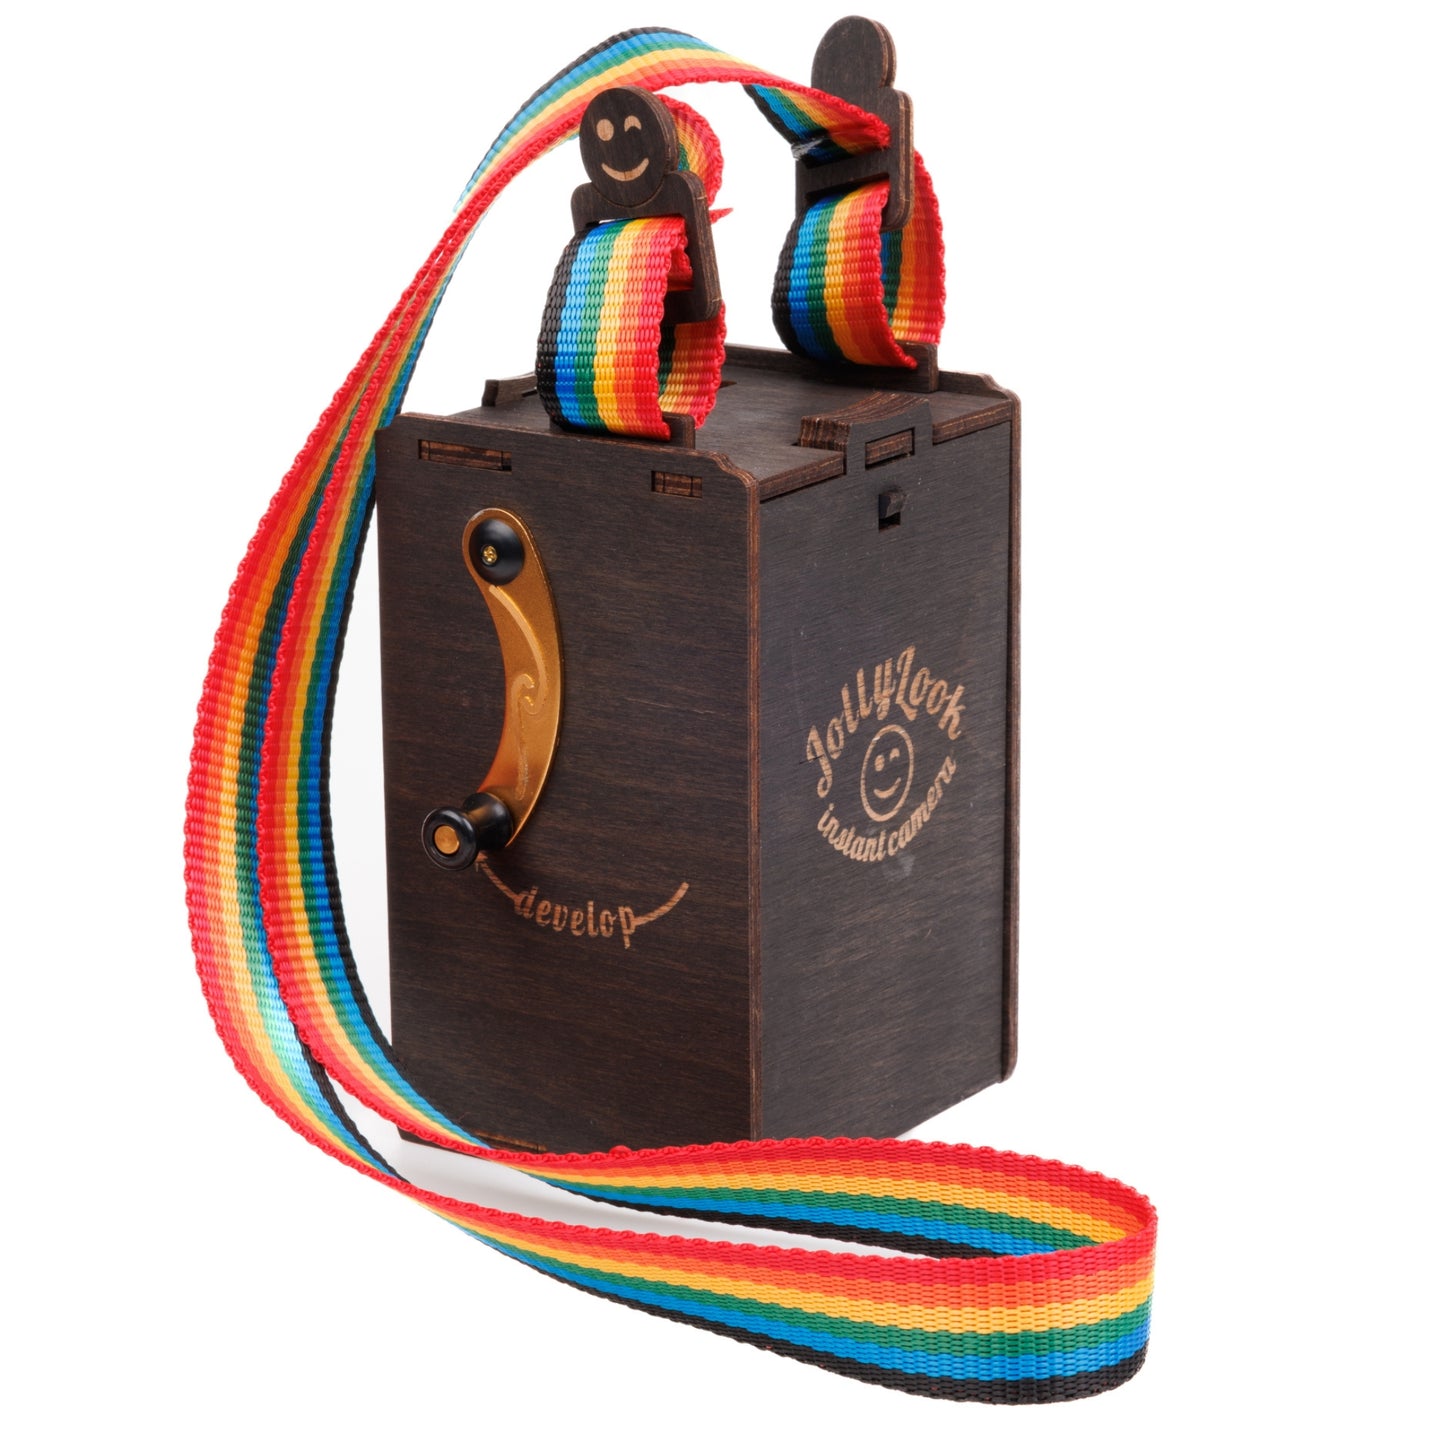 Rainbow fabric neckstrap designed for Jollylook cameras, featuring a sturdy natural wood lock for securely carrying the Jollylook camera.